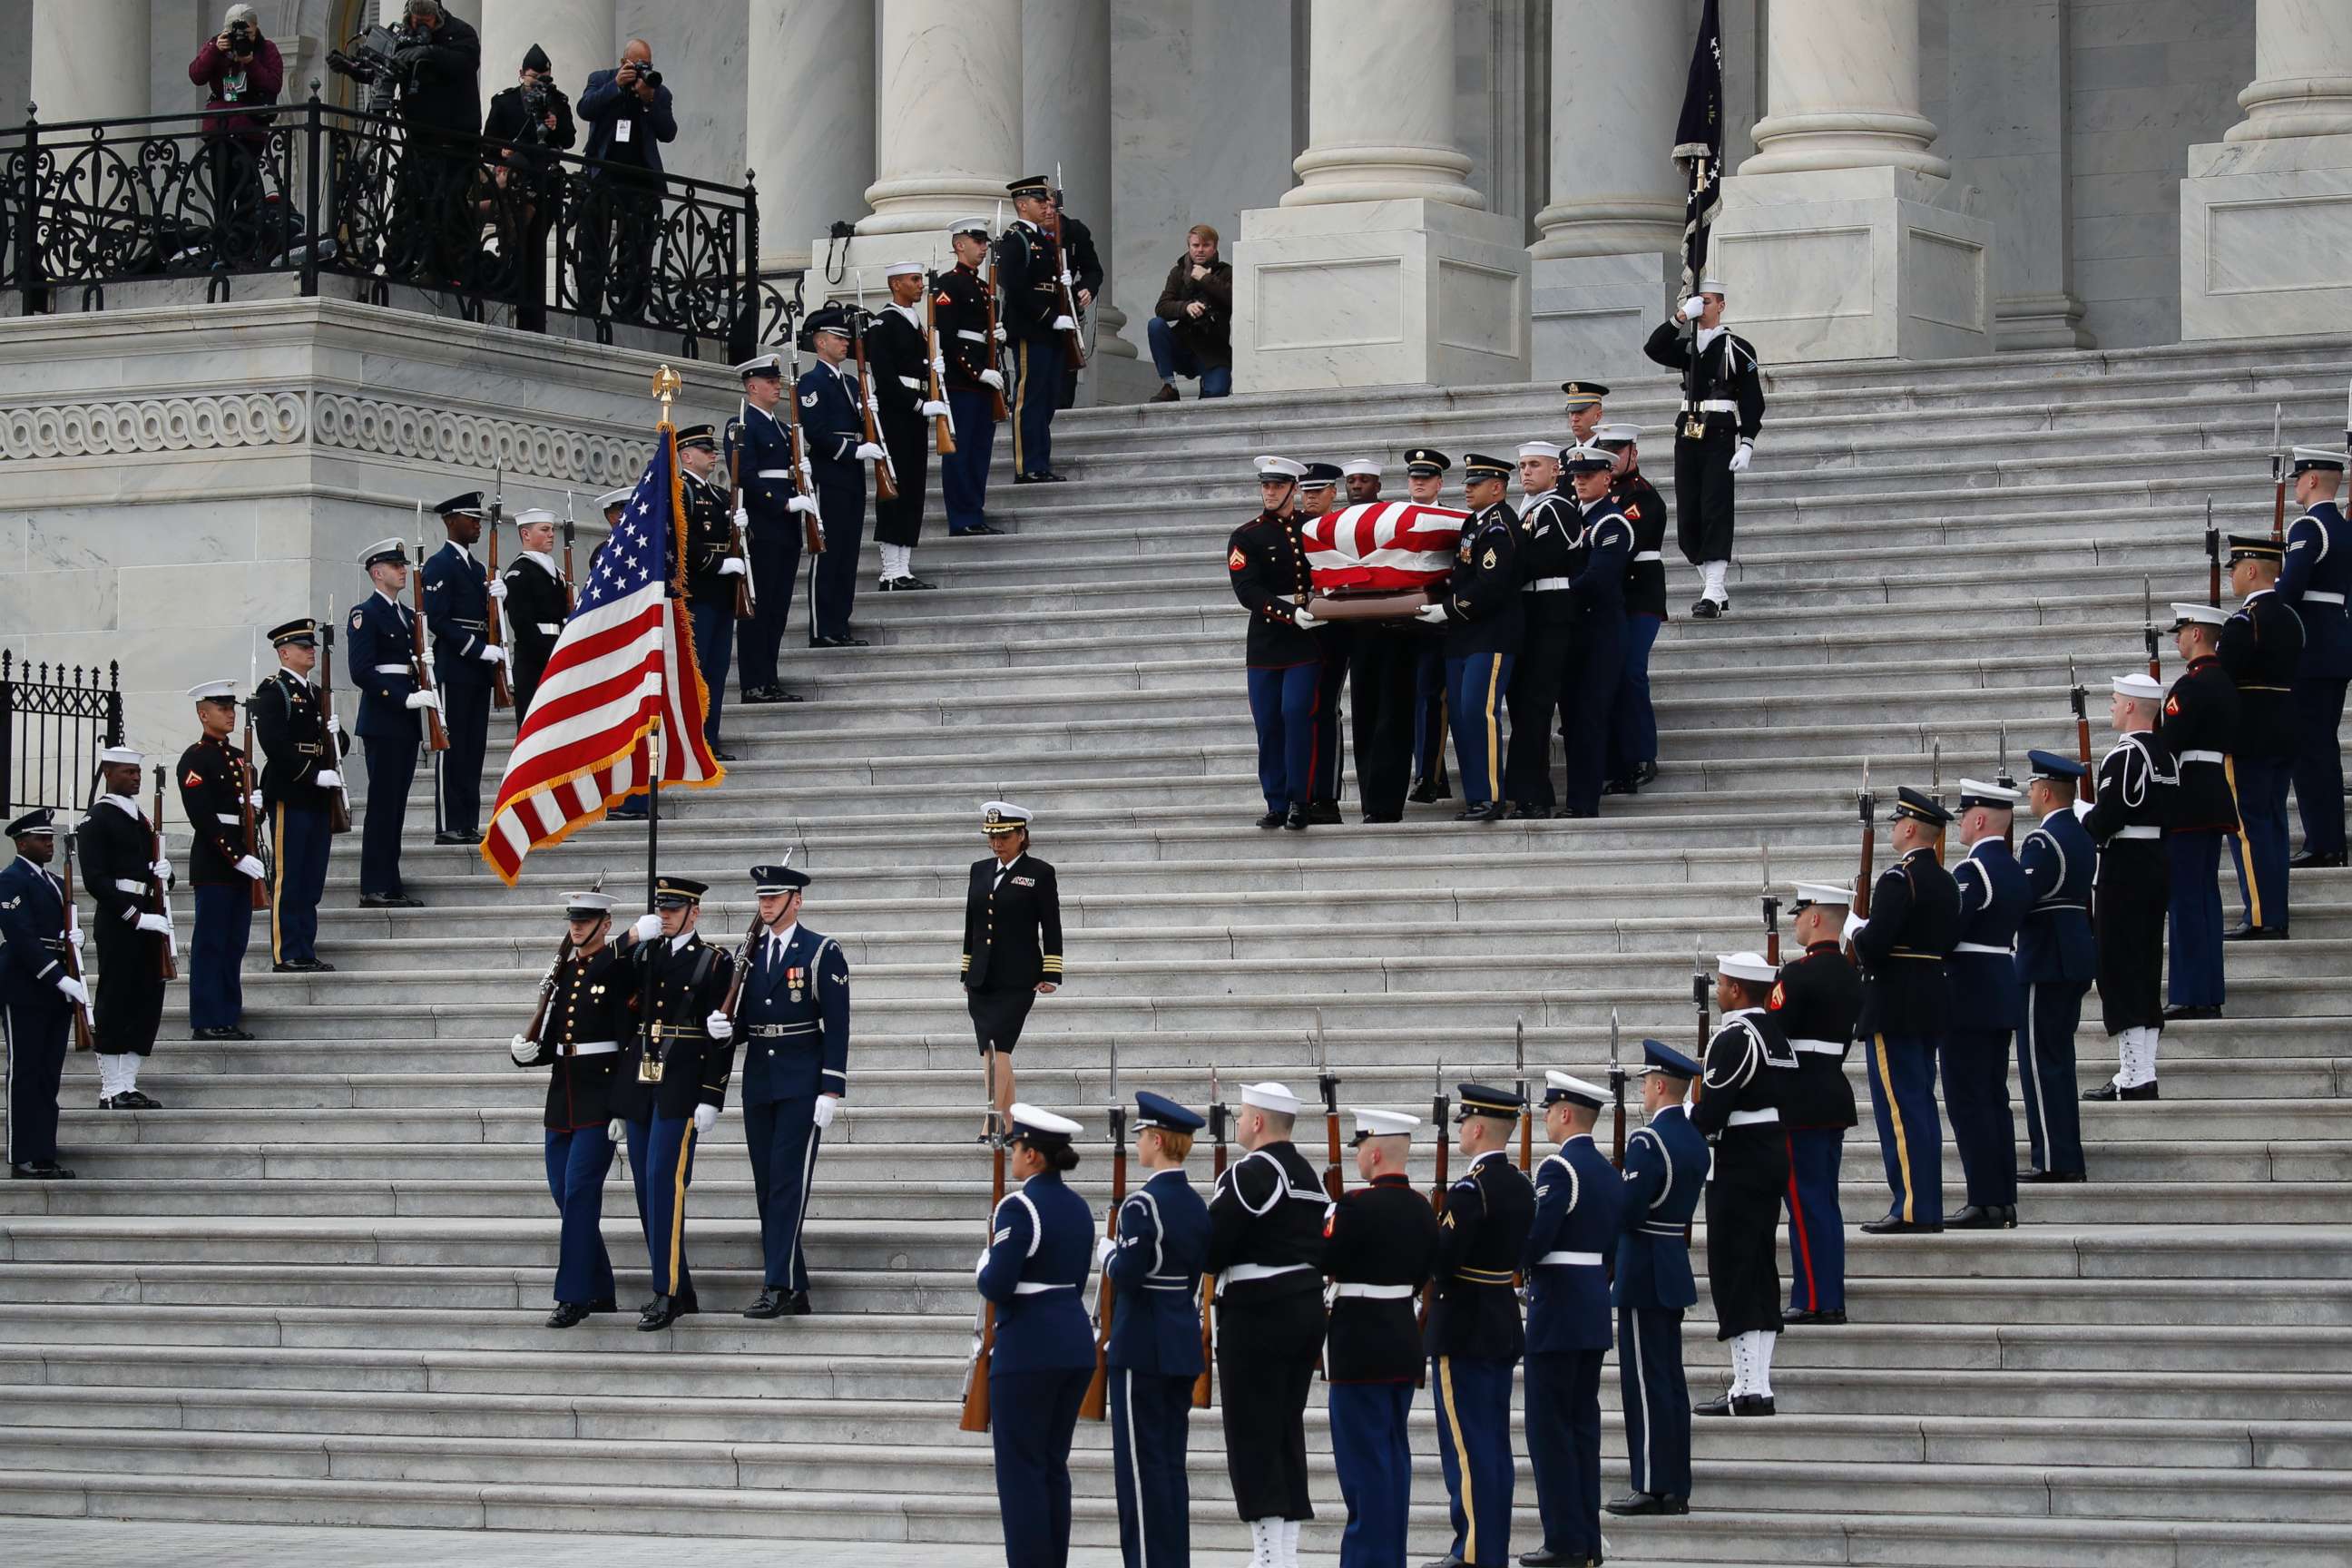 PHOTO: The flag-draped casket of former President George H.W. Bush is carried by a joint services military honor guard from the U.S. Capitol, Dec. 5, 2018, in Washington.